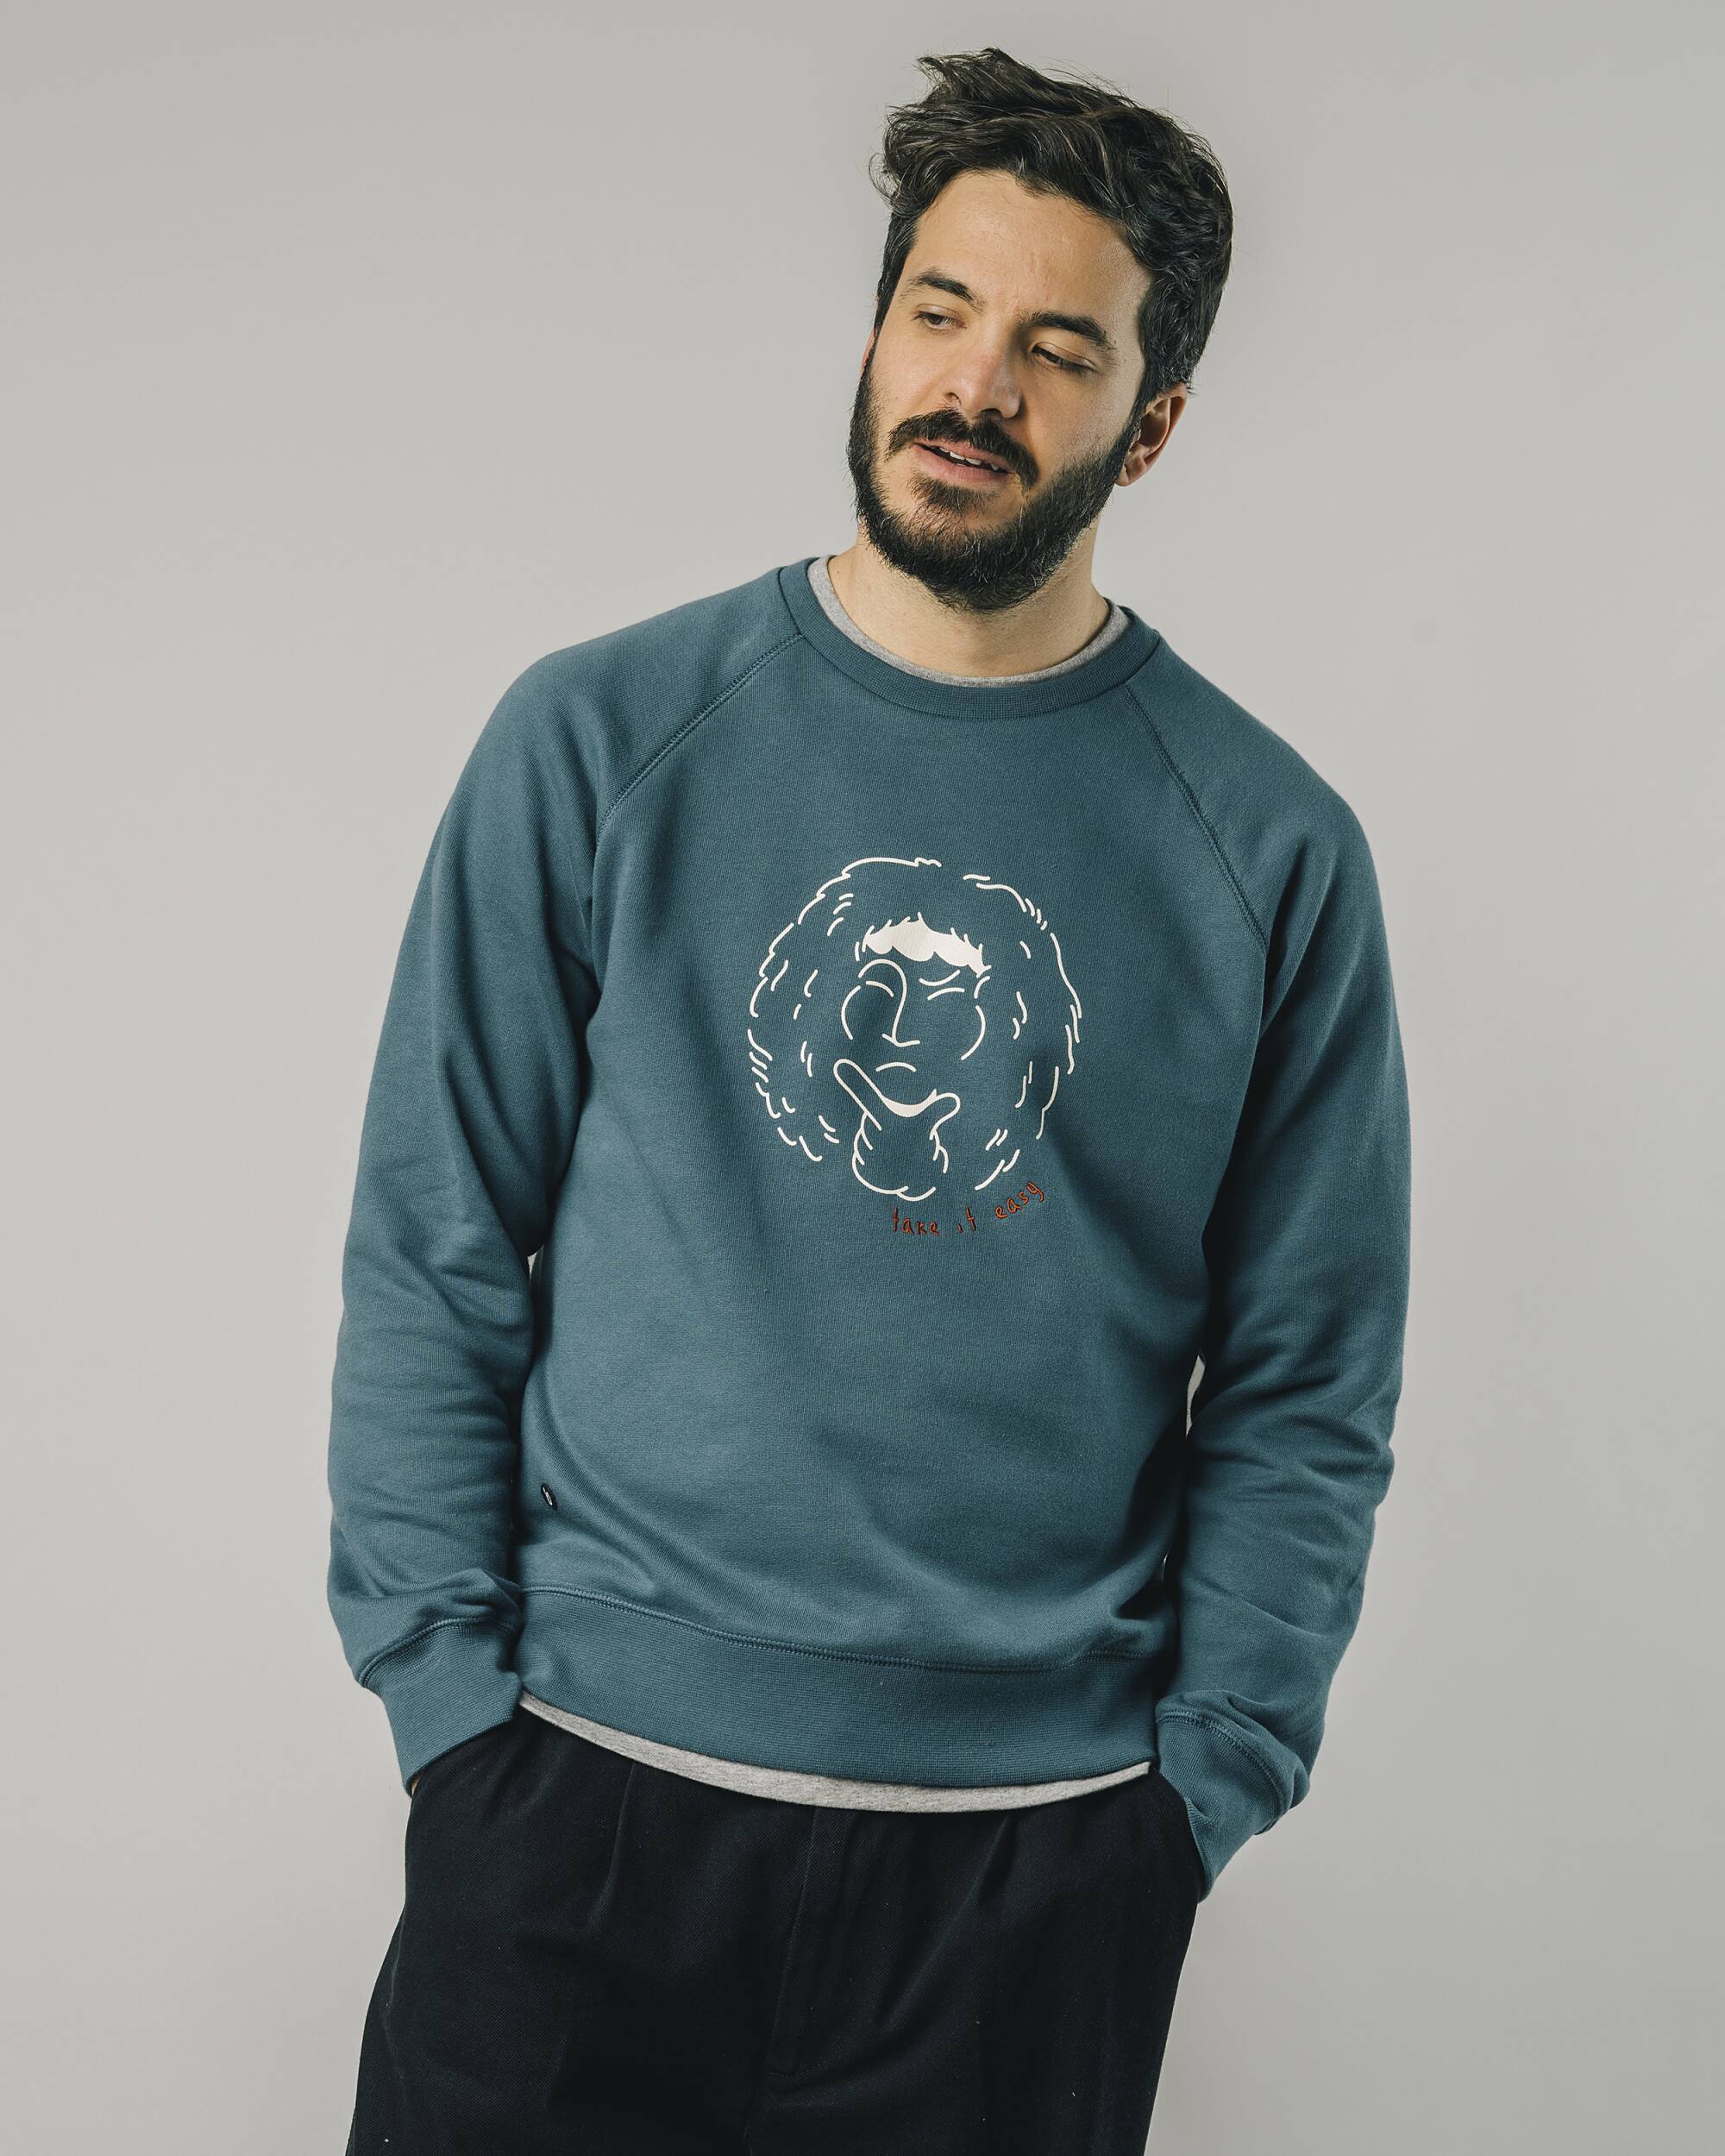 Sweatshirt "Walker" in petrol blue with great print and embroidery made of 100% organic cotton from Brava Fabrics